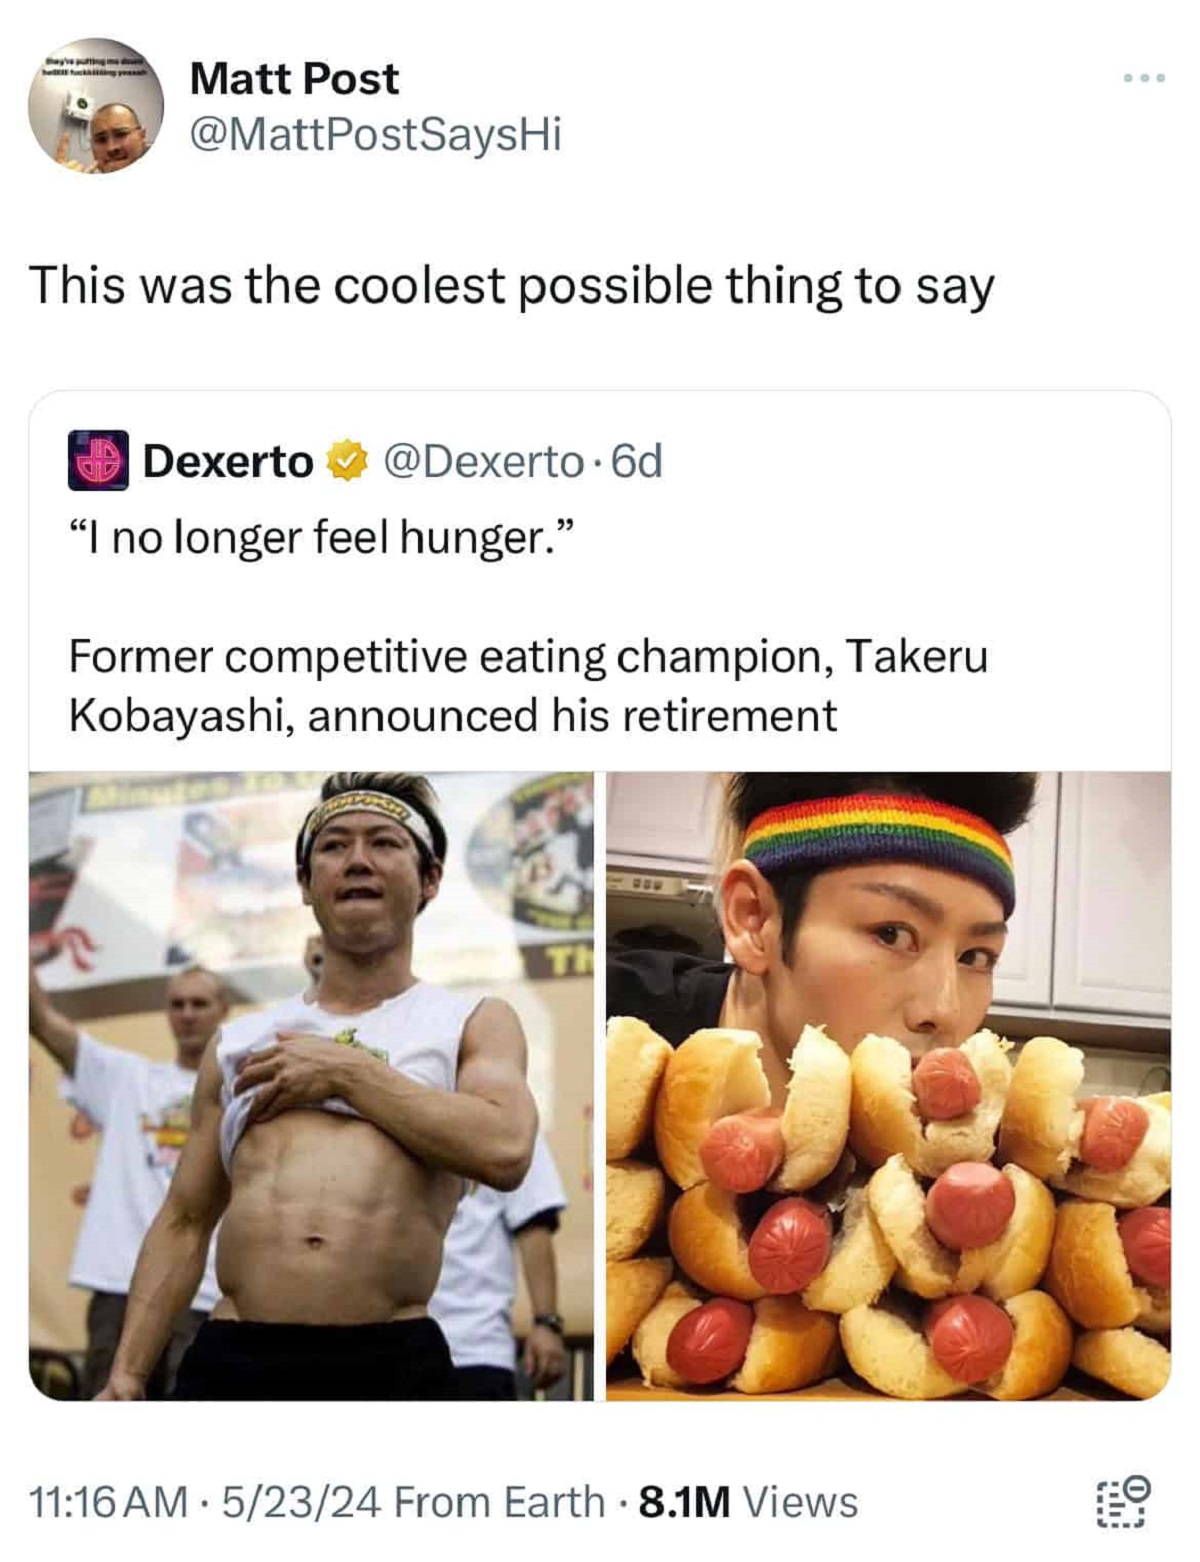 Takeru Kobayashi - Matt Post This was the coolest possible thing to say Dexerto . 6d "I no longer feel hunger." Former competitive eating champion, Takeru Kobayashi, announced his retirement 52324 From Earth 8.1M Views 03